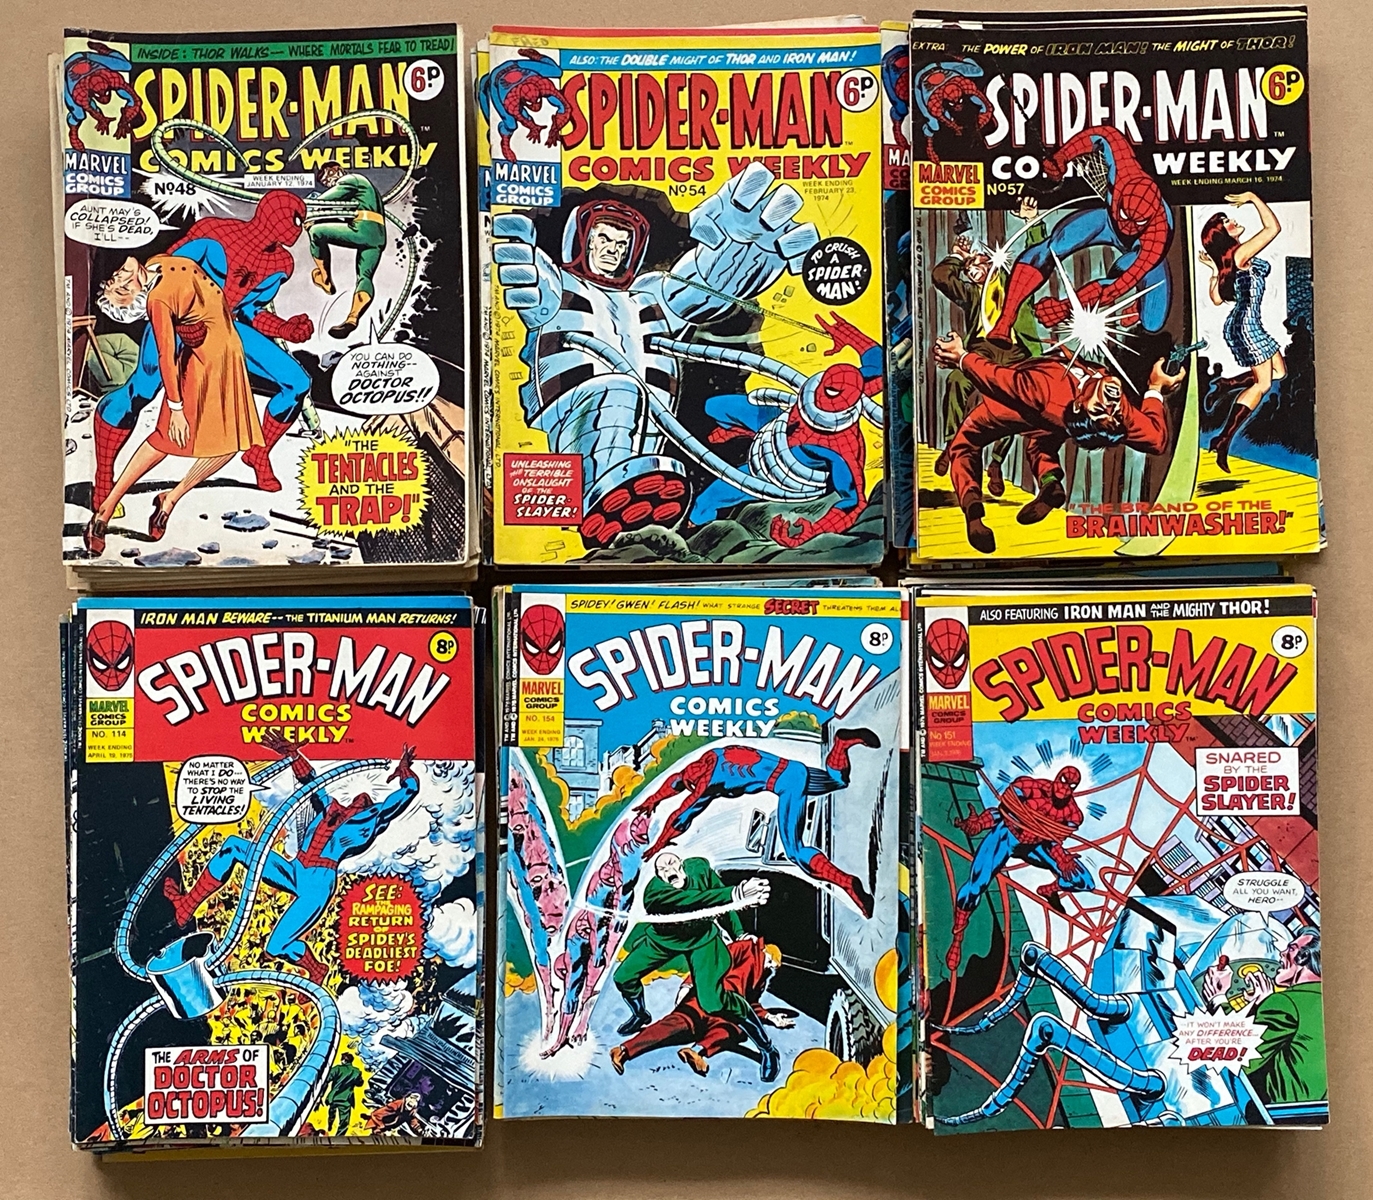 SPIDER-MAN COMICS WEEKLY (109 in Lot) - (1973/77 - BRITISH MARVEL) - GD (Pence Copy) - Run